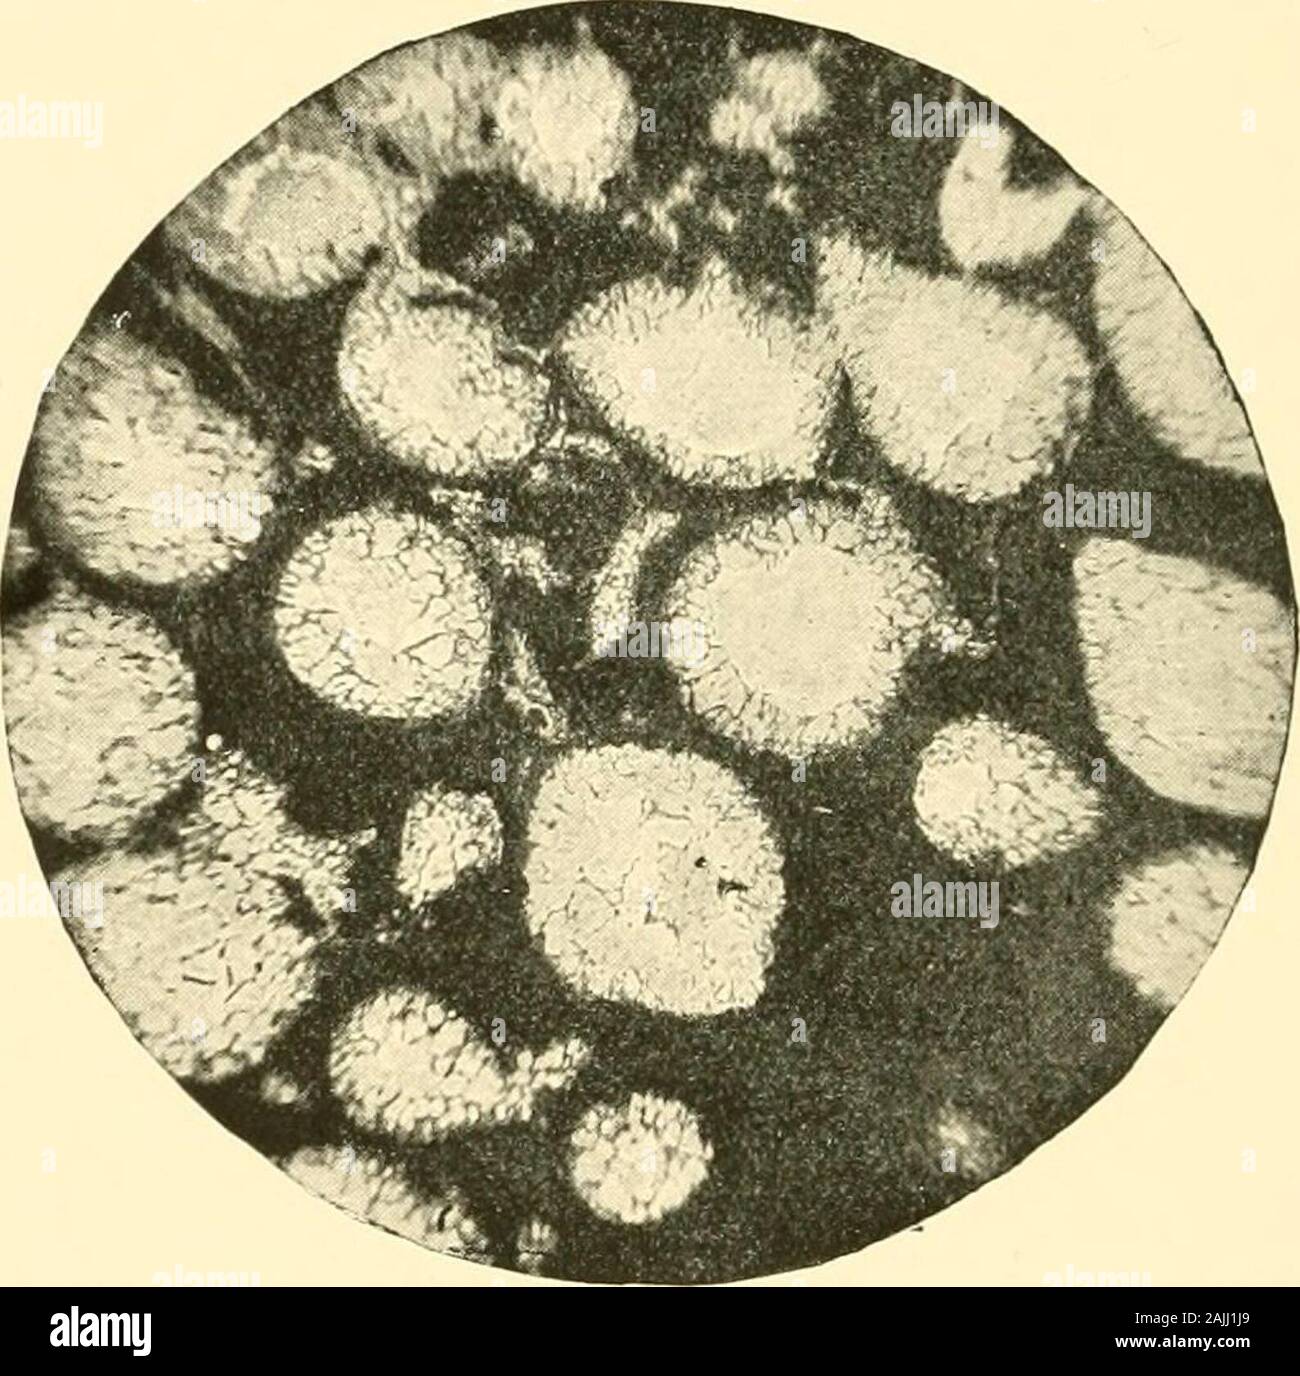 The foraminifera: an introduction to the study of the protozoa . a in any country. The absence ofthese organisms is very remarkable, for the condi-tions under which the deposits of Devonian age withthe marine facies were laid down seem to be espe-cially favourable for the existence of Foraminifera.The usual concomitants of foraminiferal depositsare greatly in evidence in Devonian rocks, such ascorals, ostracoda, and oolitic-granules, but neverthe-less the Foraminifera are strangely wanting. This singular paucity of Foraminifera in theDevonian strata is strongly emphasised by the appa-rently su Stock Photo